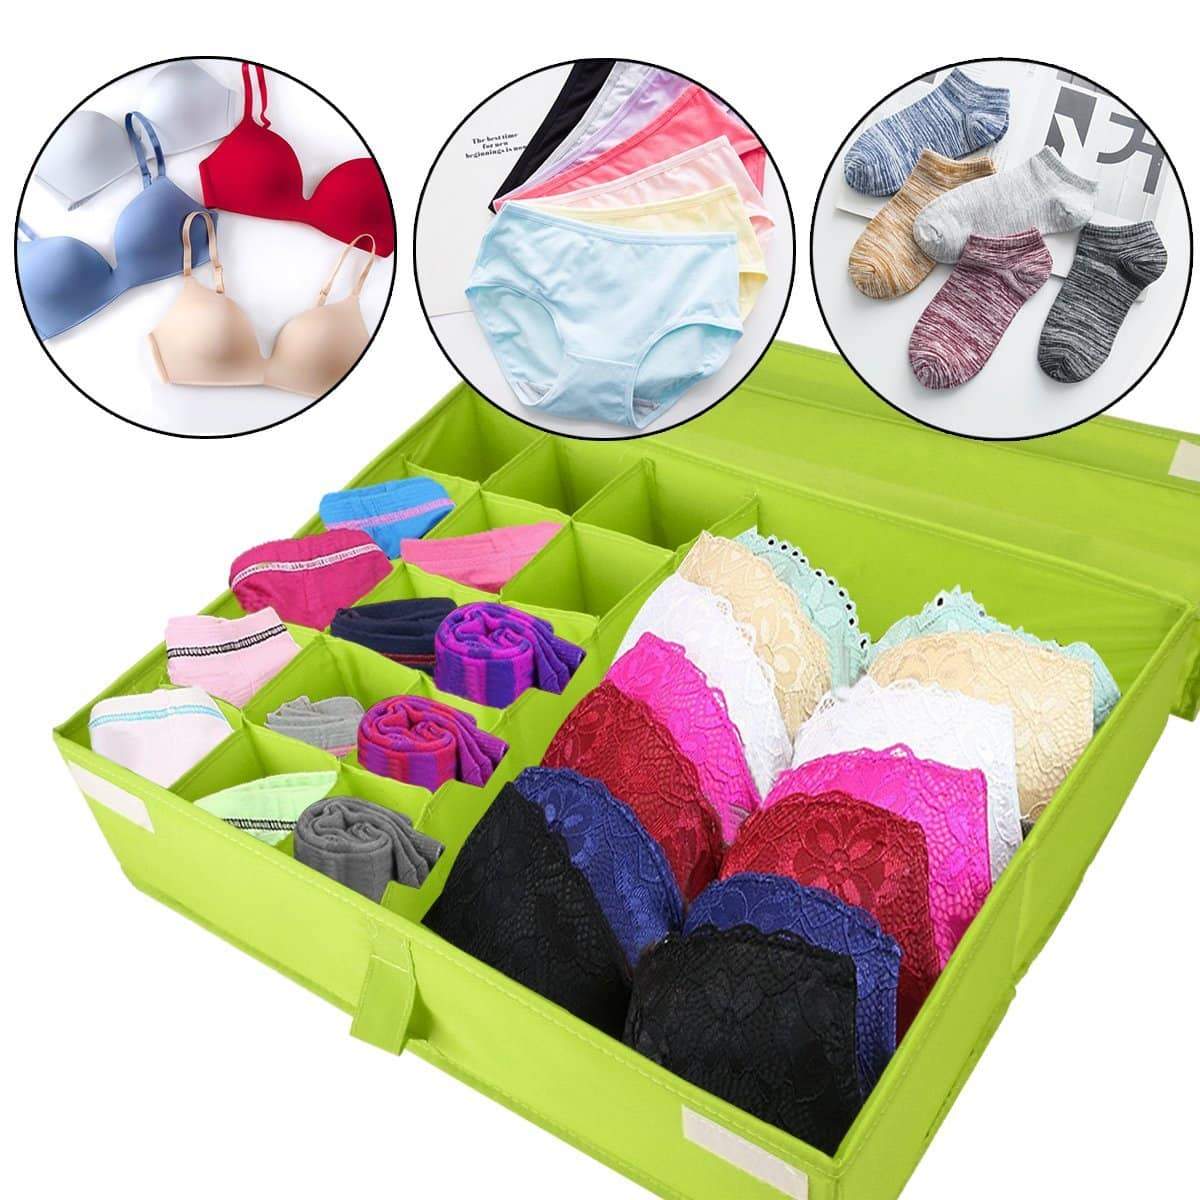 The best begost storage bins foldable underwear organizer storage box washable multi functional drawer dividers 2 in 1 closet divider storage box with cover for underwear socks ties bra and bins green